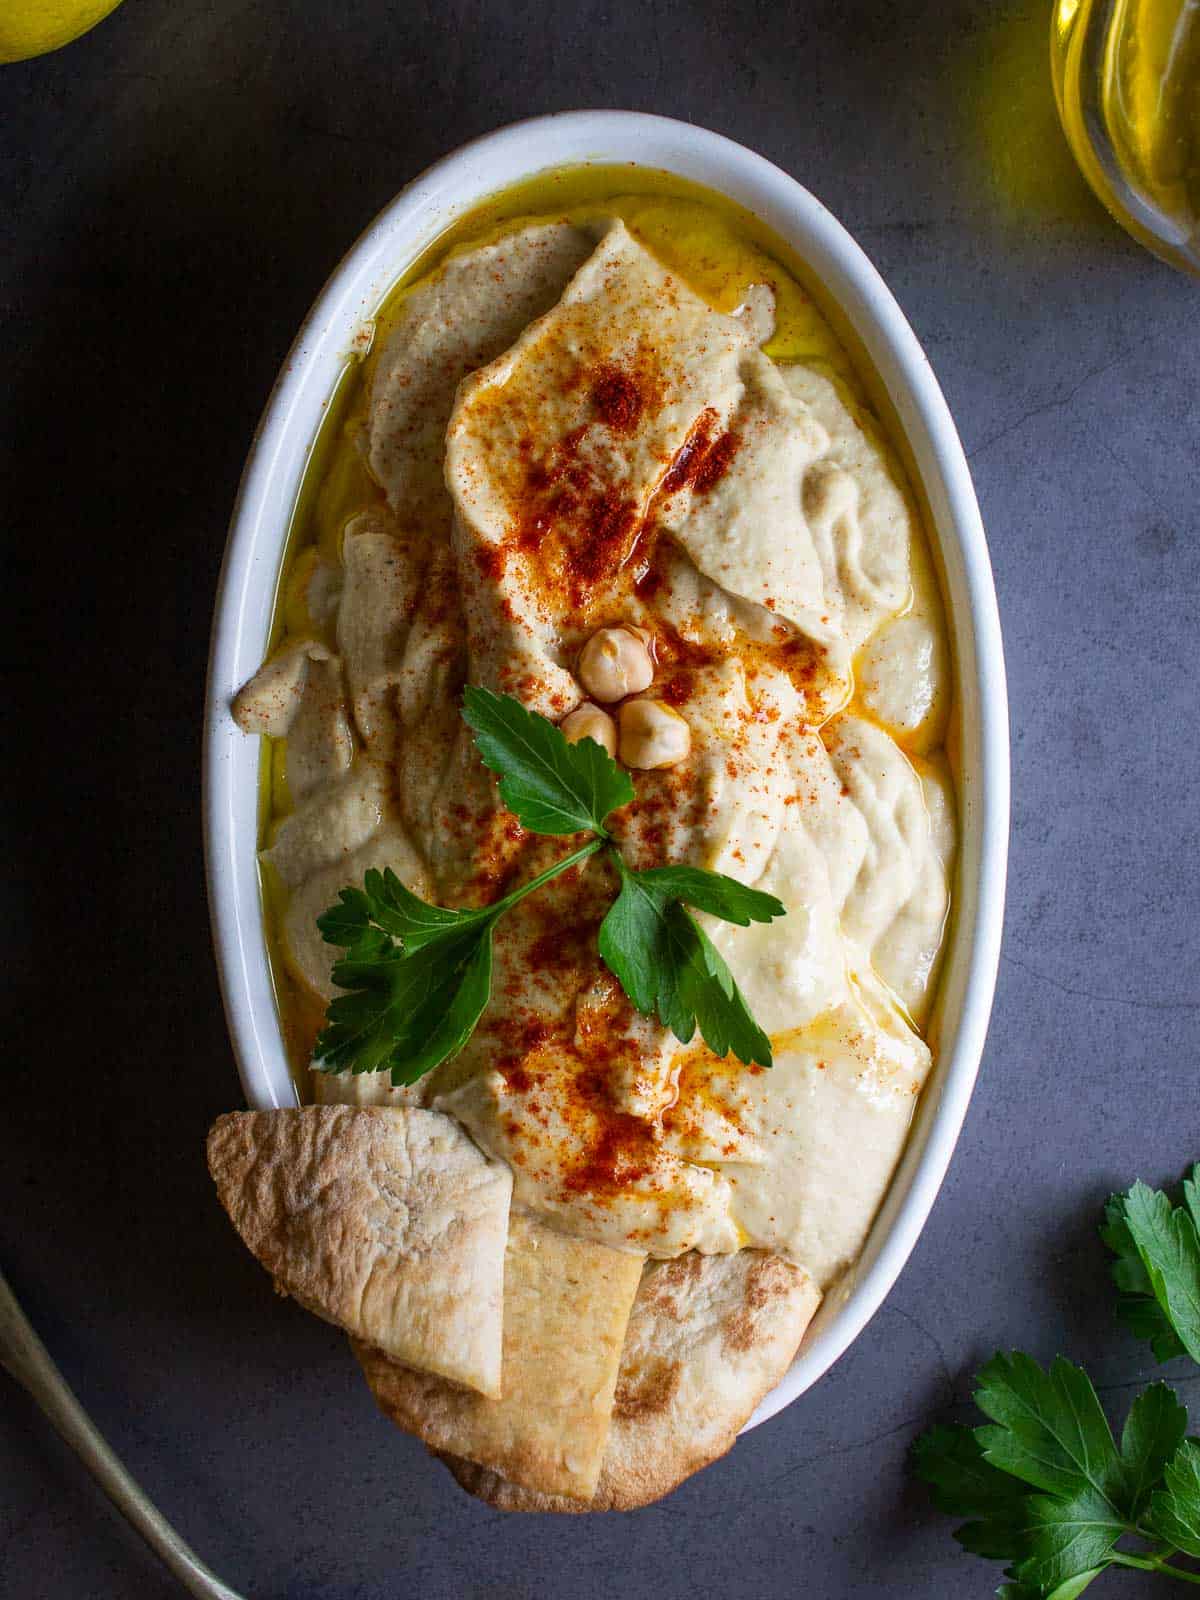 Hummus plated with paprika, olive oil and pita chips.